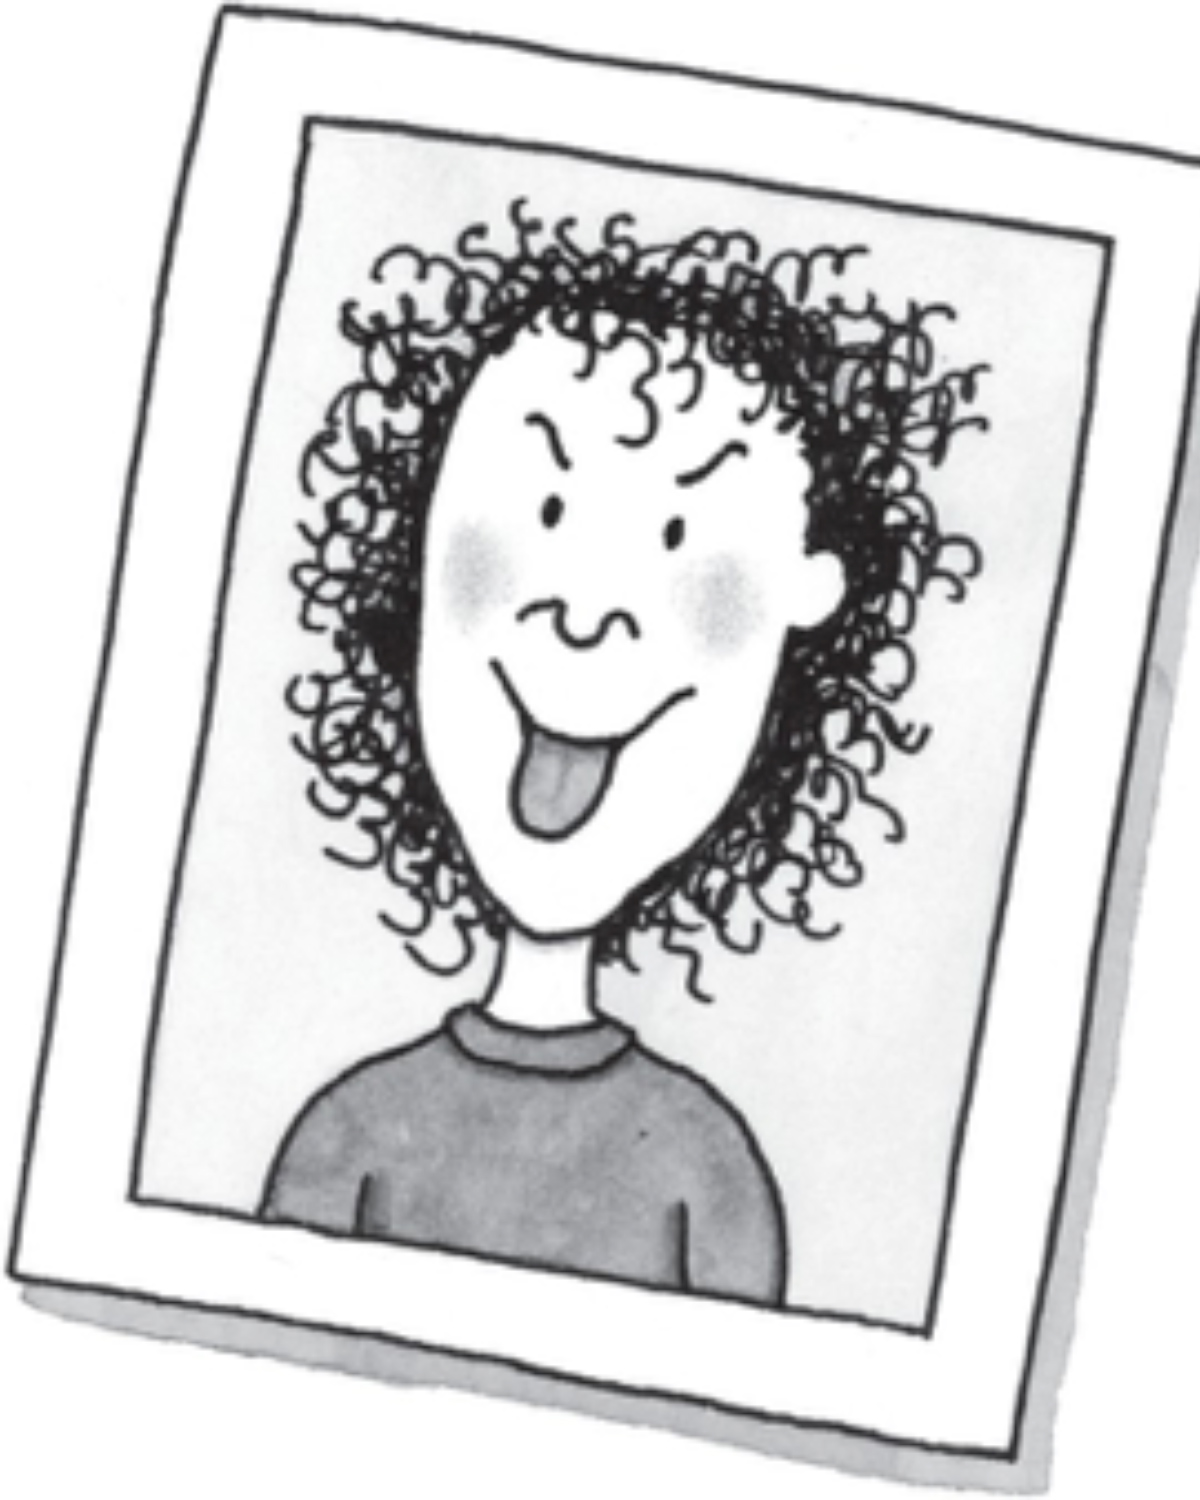 20 facts to get to know Tracy Beaker